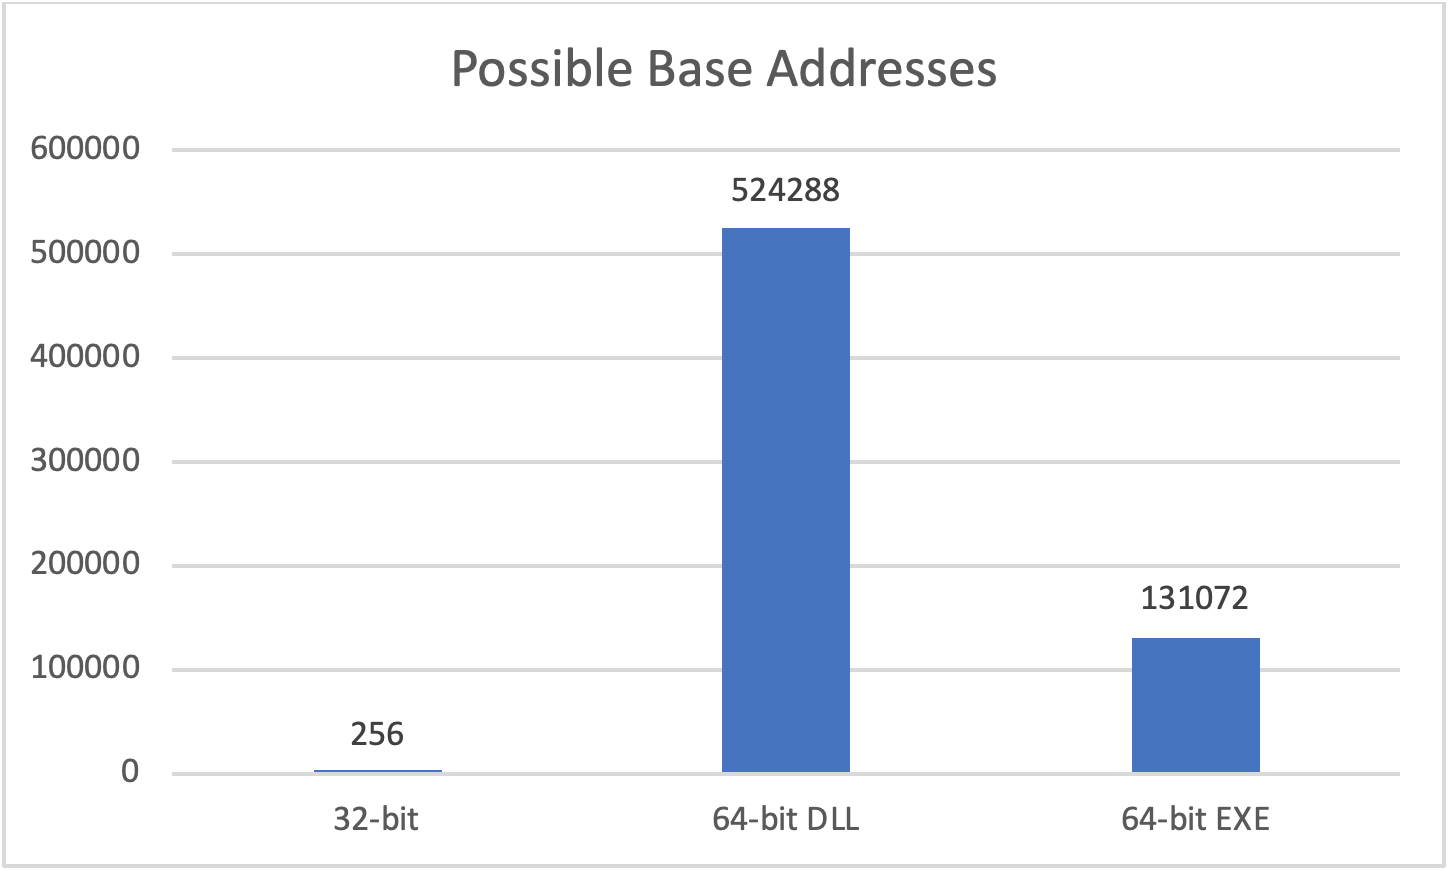 Recompiling 32-bit code as 64-bit dramatically increases the number of possible base addresses for selection by ASLR